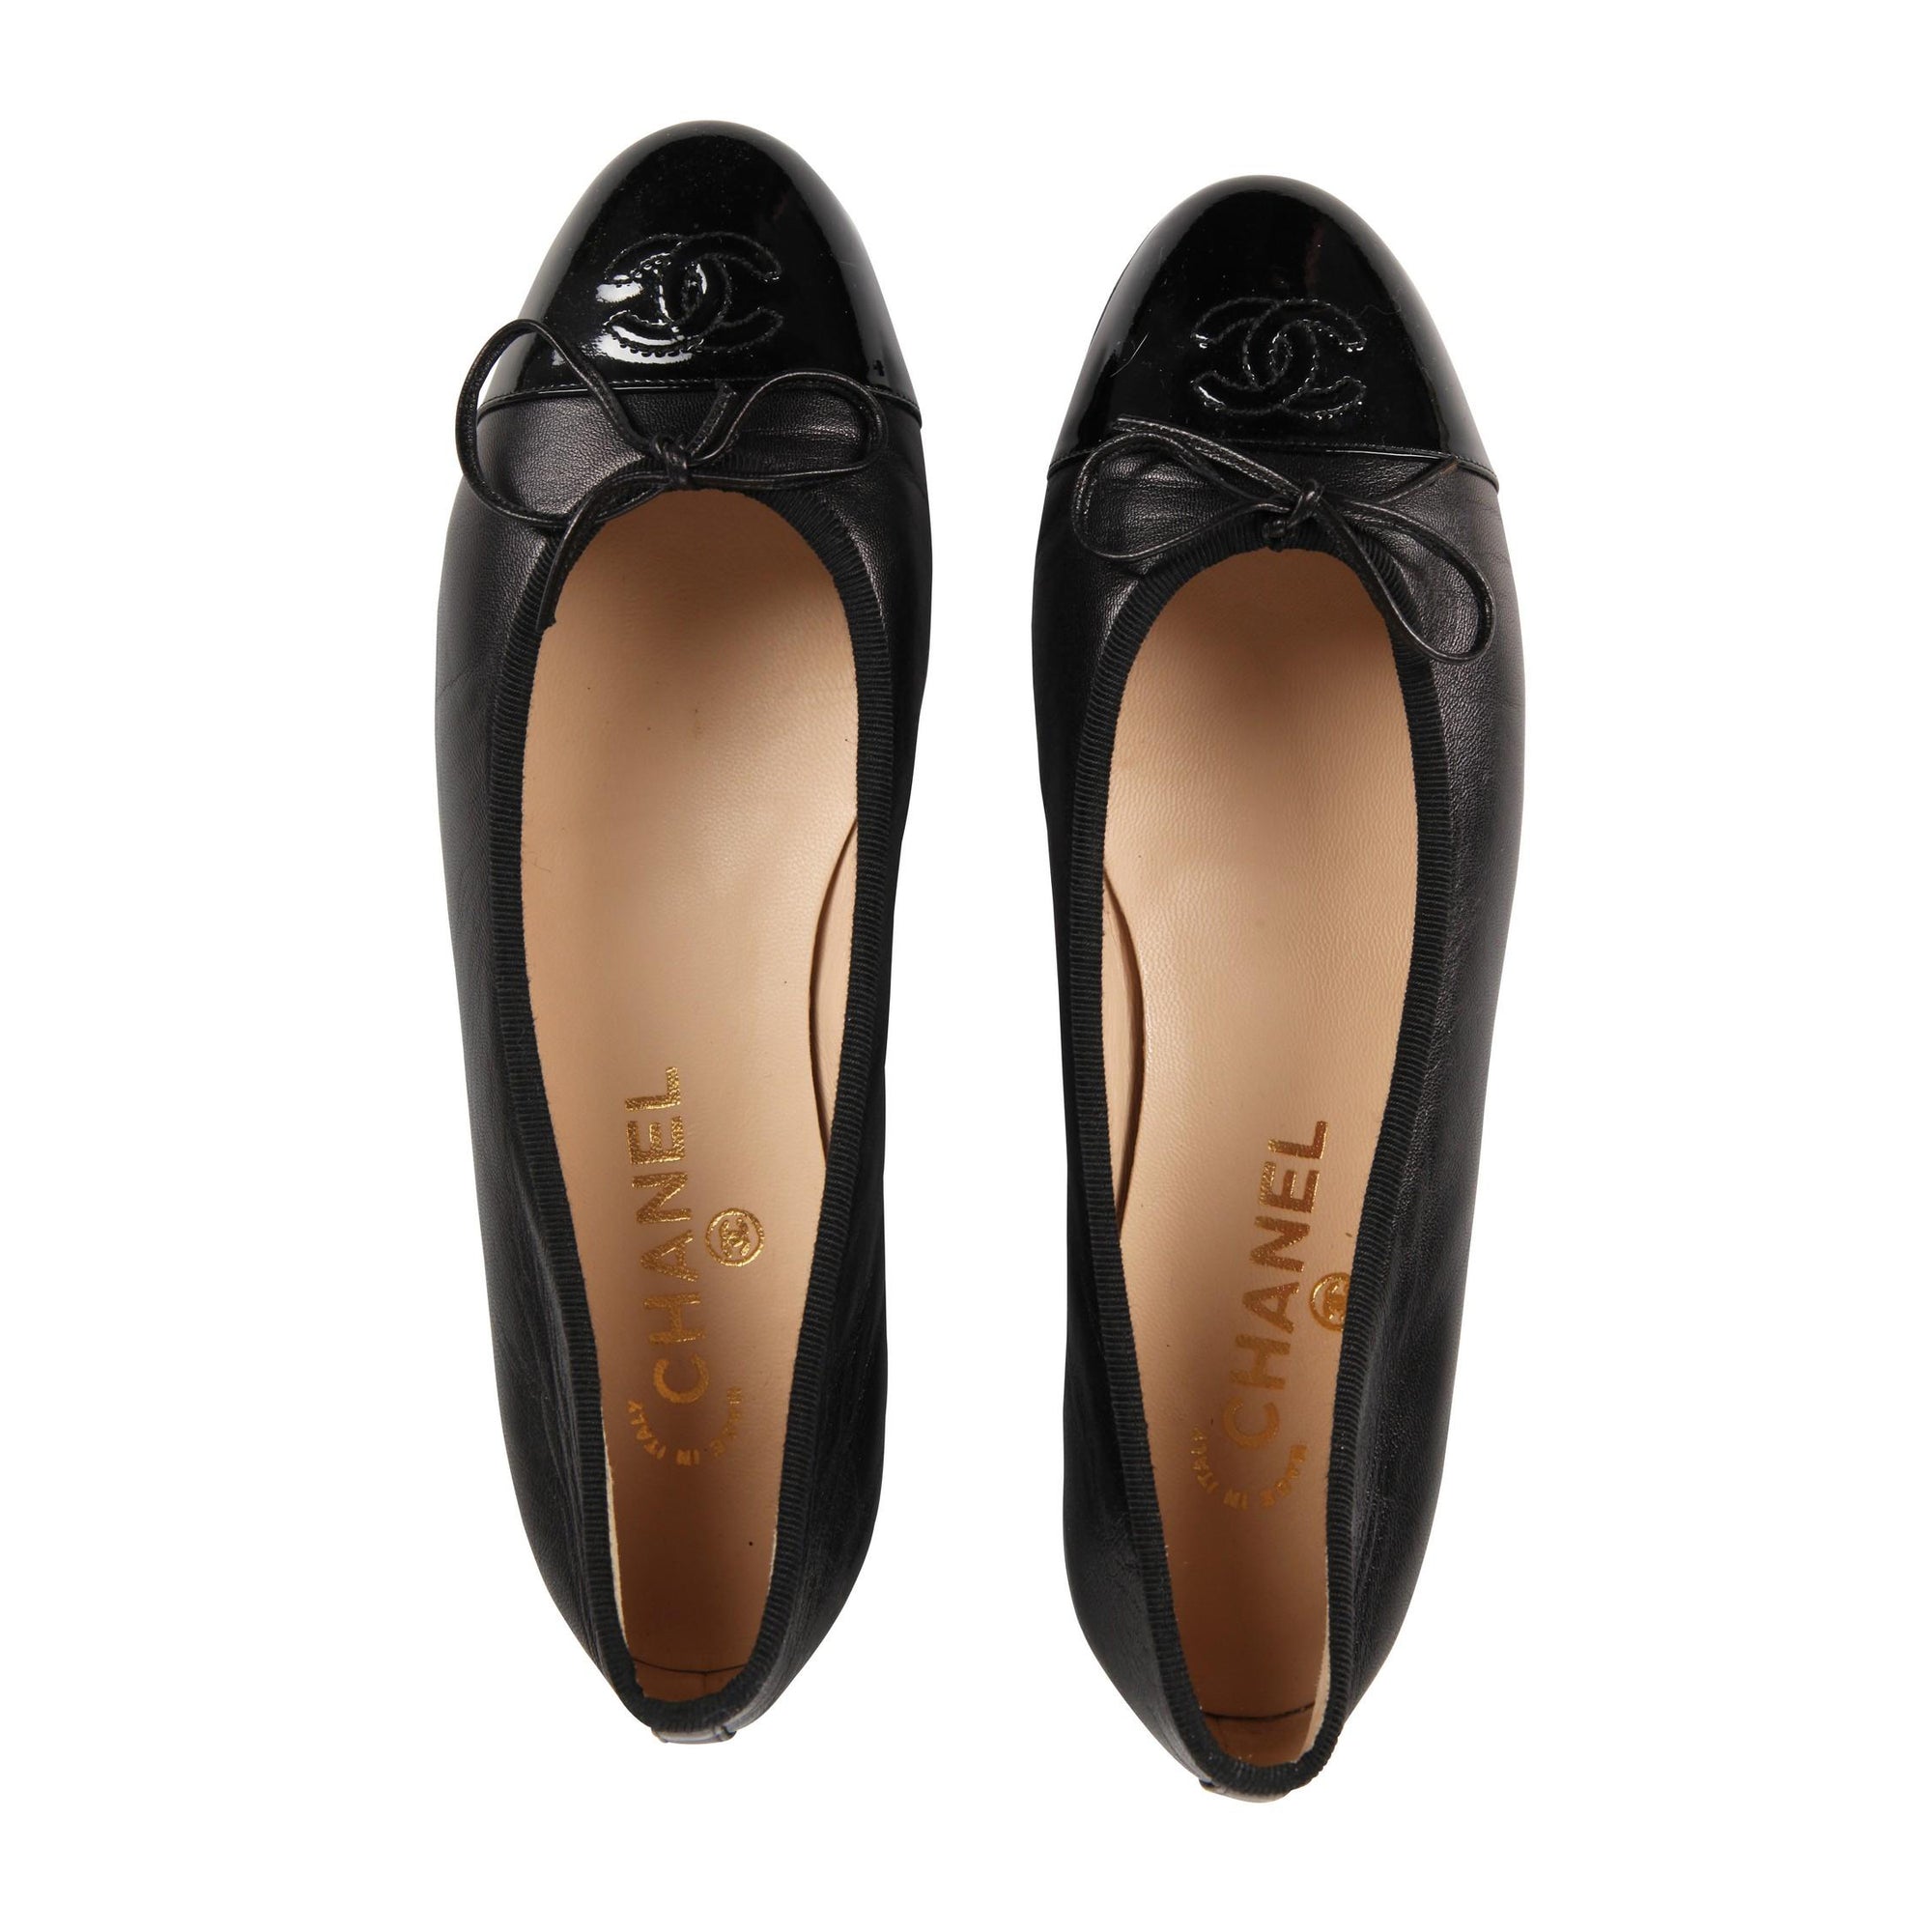 Chanel - Authenticated Ballet Flats - Leather Black Plain for Women, Never Worn